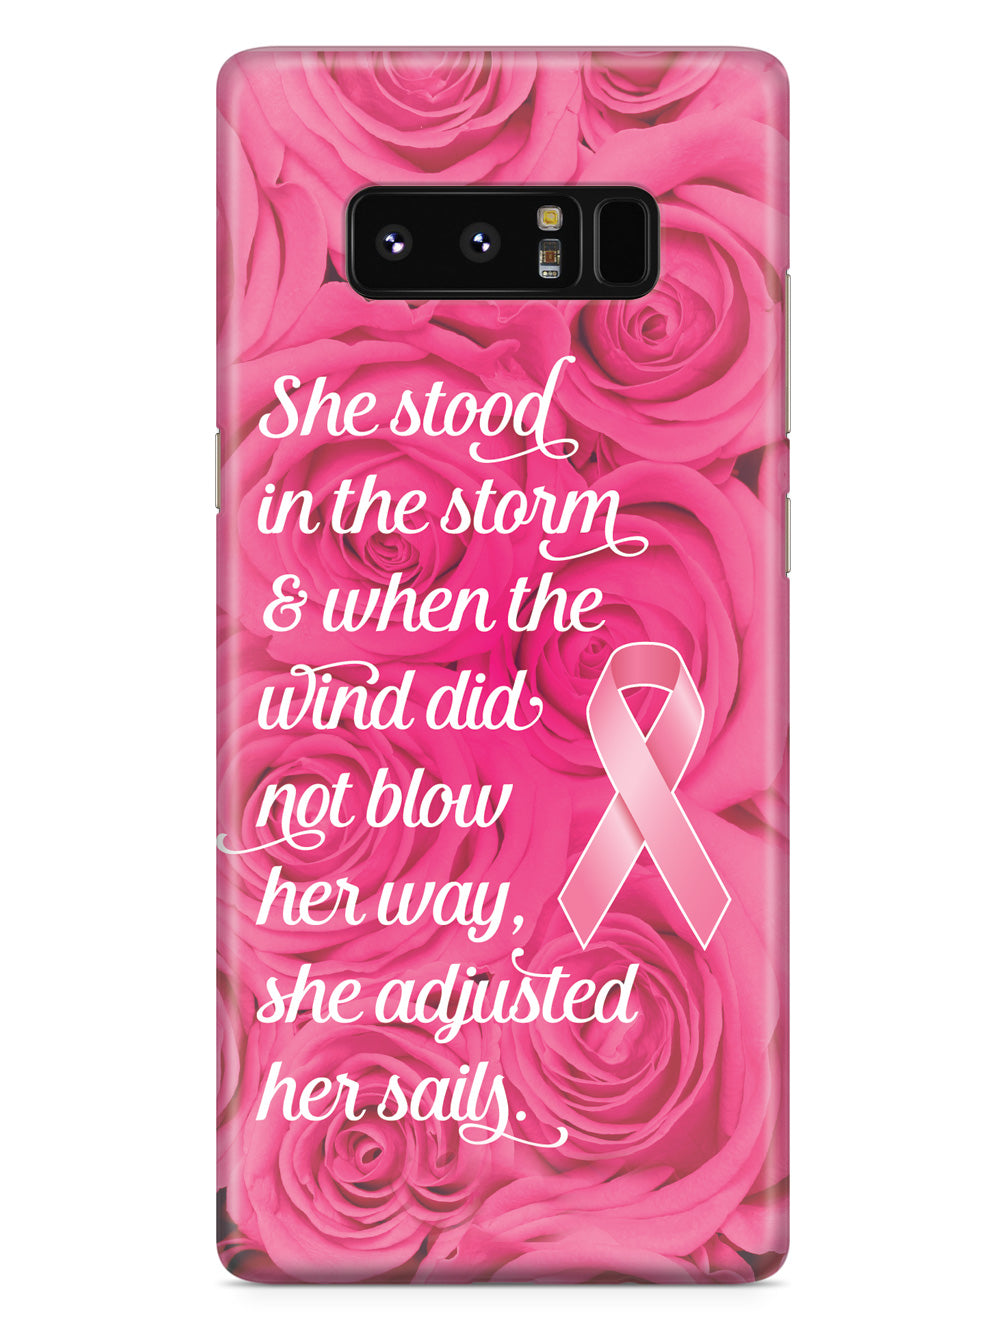 She Stood In The Storm - Breast Cancer Awareness Case